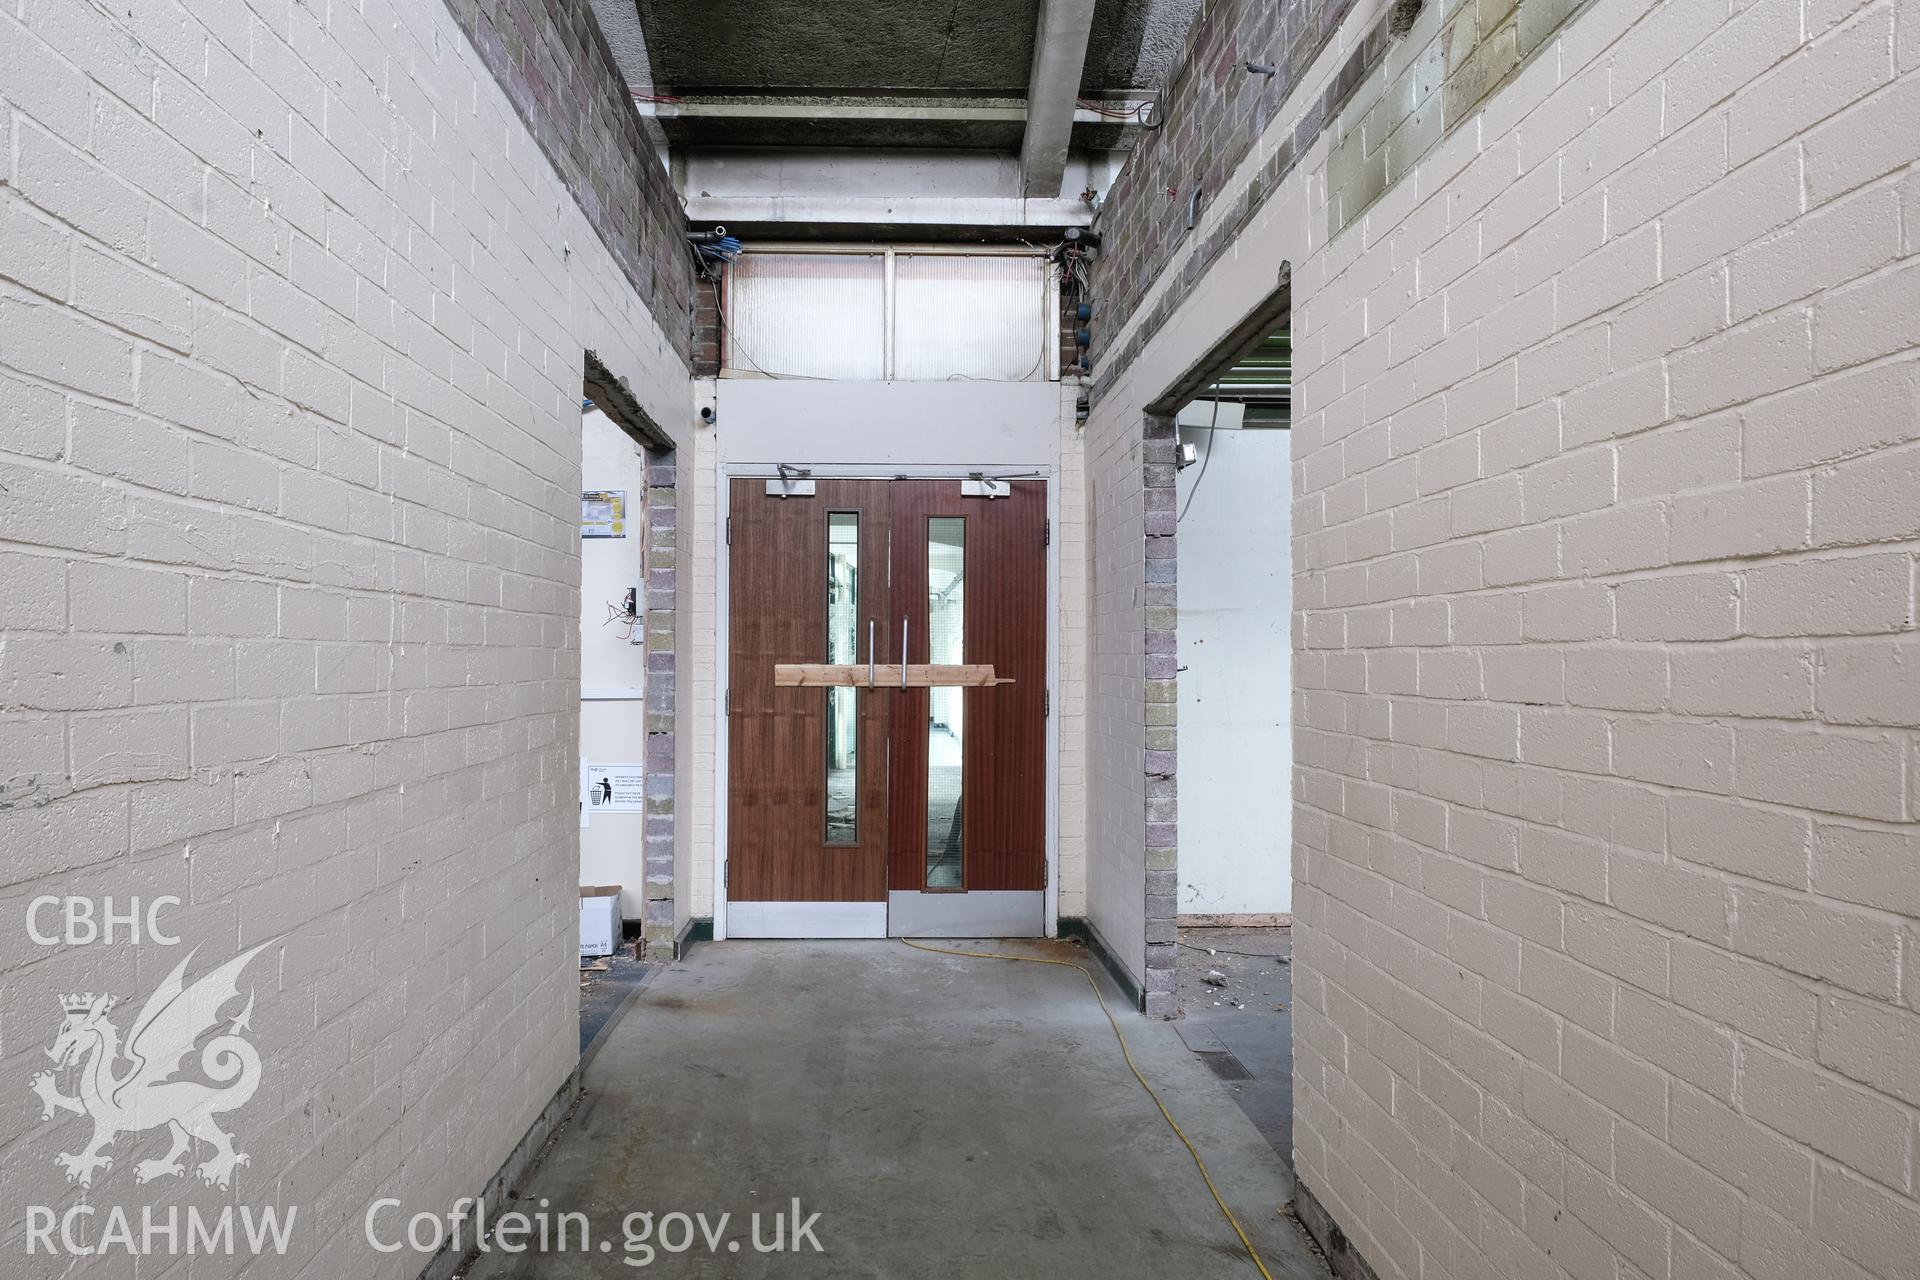 Digital colour photograph showing interior view of hallway at Caernarfonshire Technical College, Ffriddoedd Road, Bangor. Photographed by Dilys Morgan and donated by Wyn Thomas of Grwp Llandrillo-Menai Further Education College, 2019.